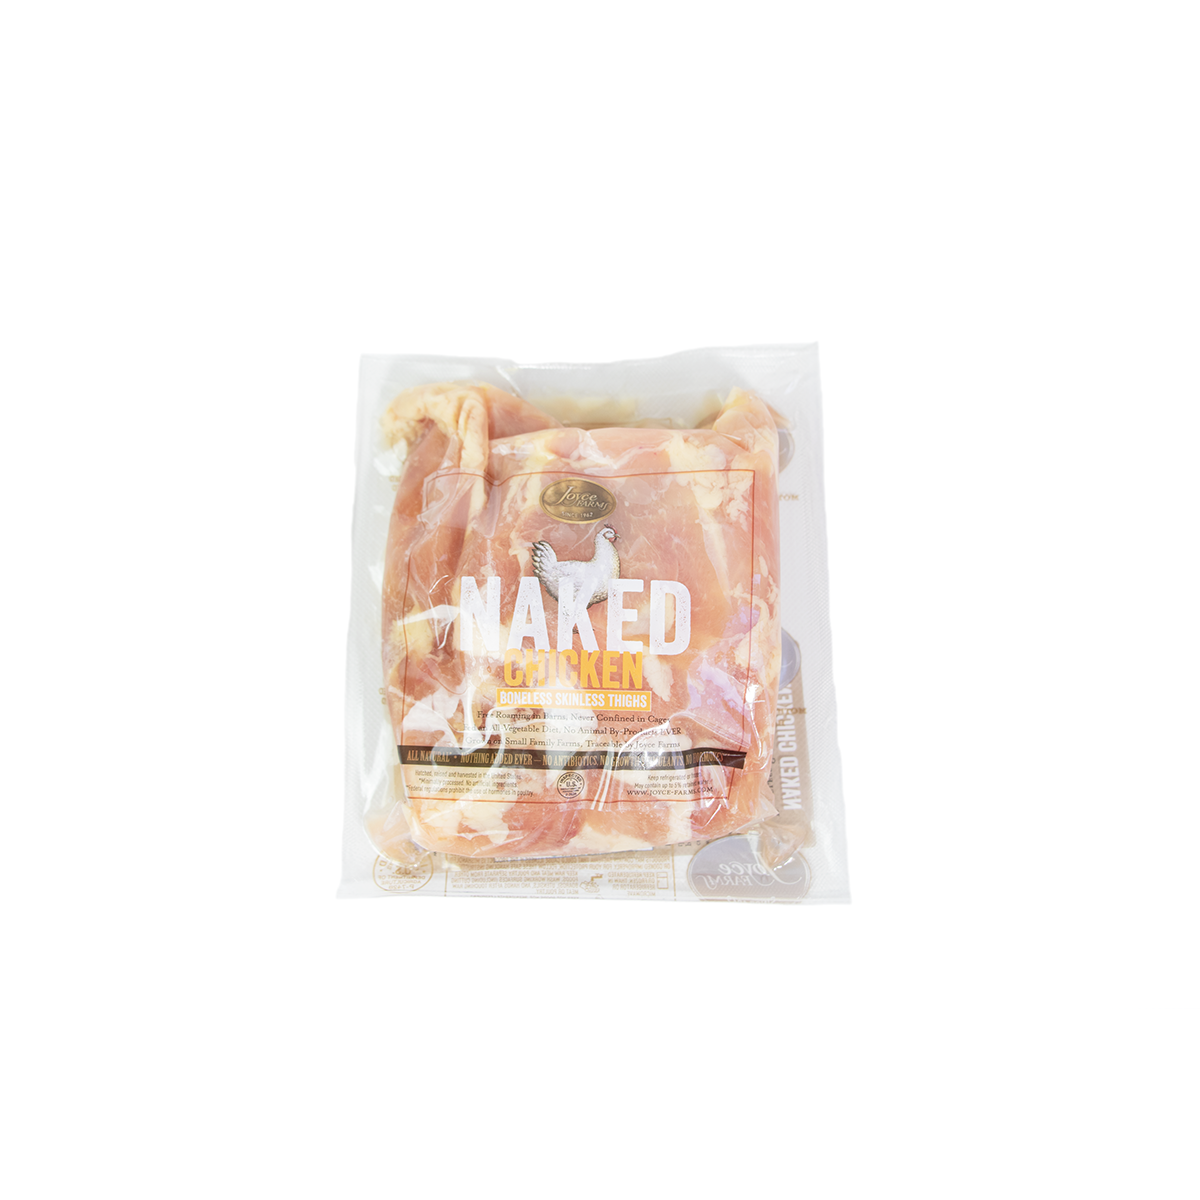 A package of Joyce Farms Boneless Chicken Thighs (8 packs, 1 lb. per pack) in a plastic bag.